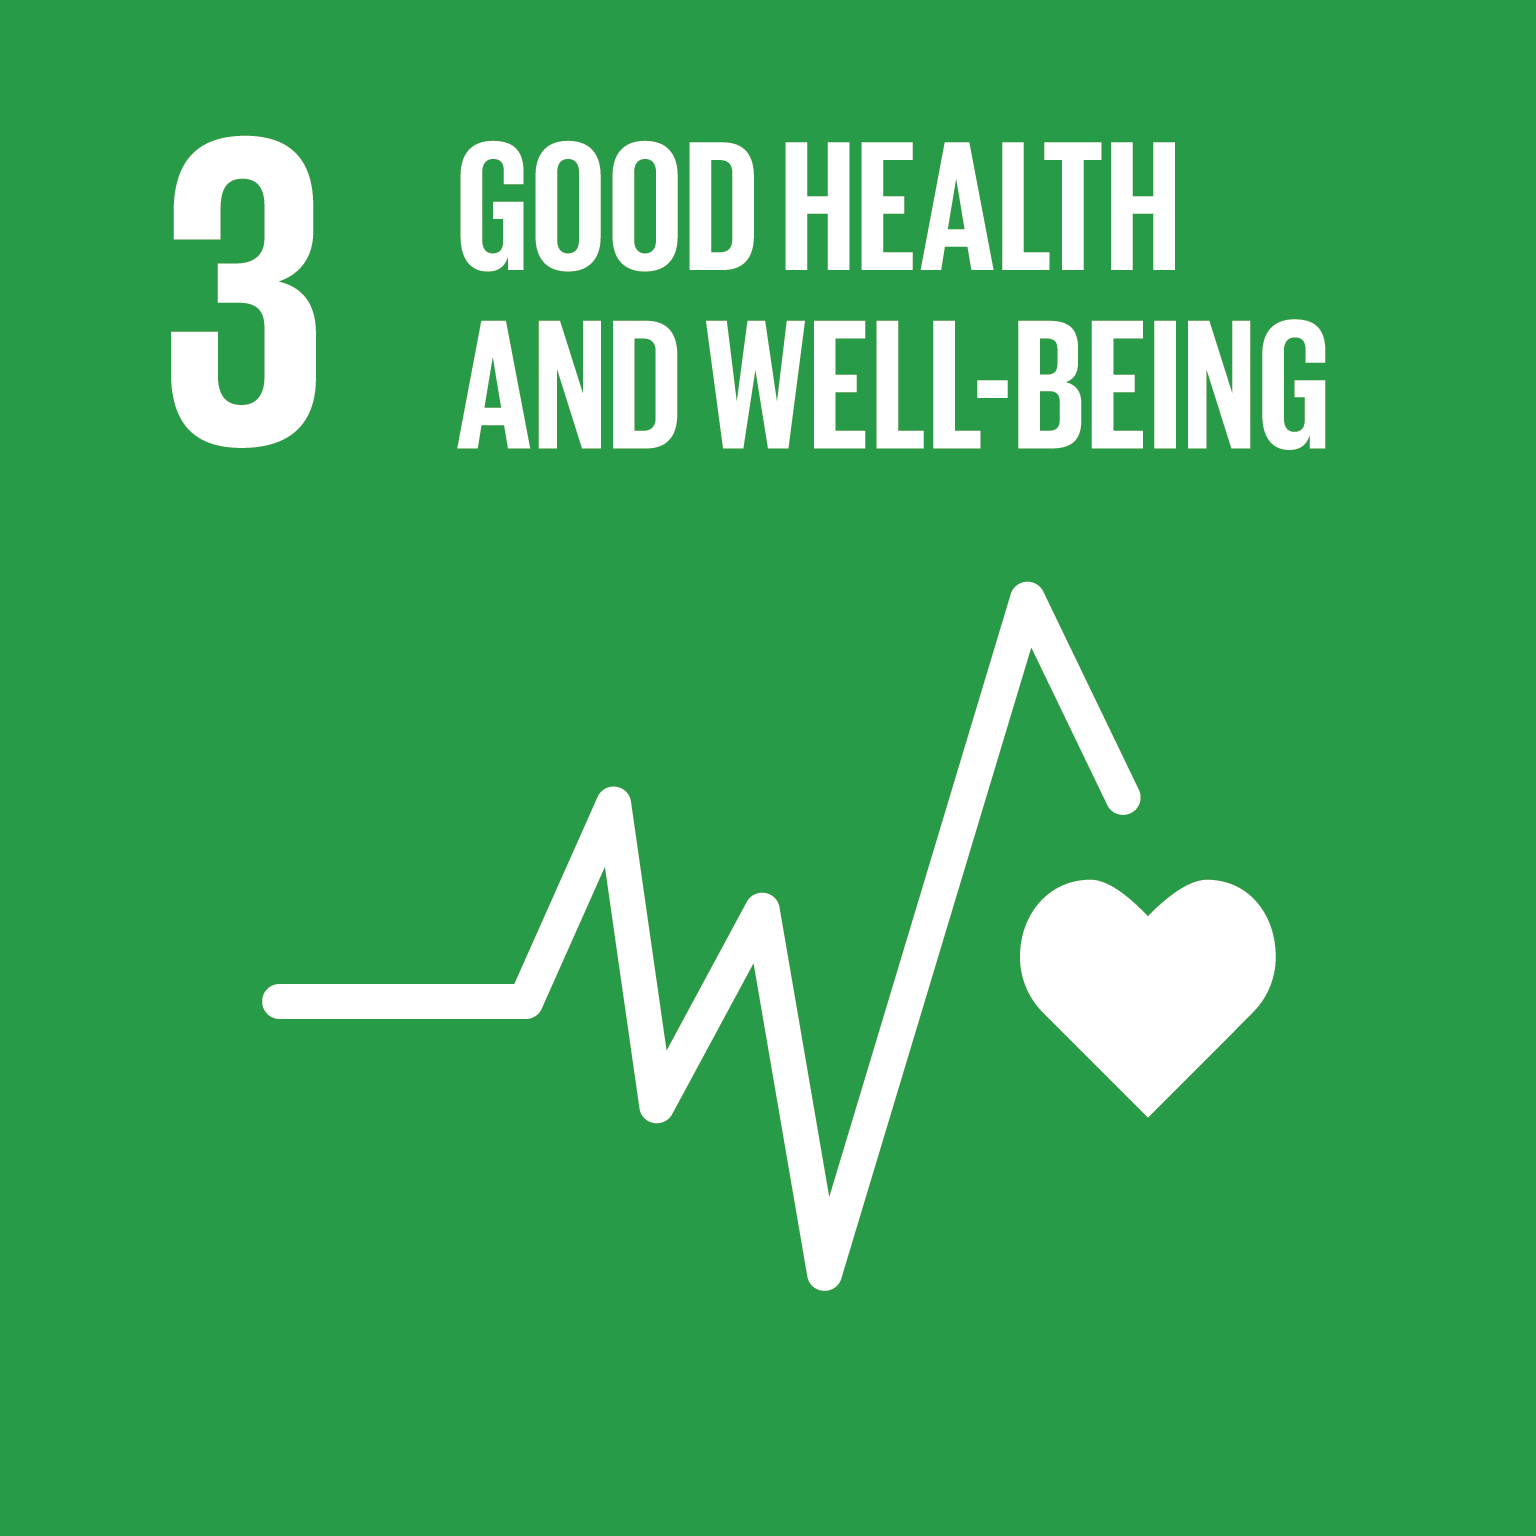 Goal 3. GOOD HEALTH AND WELL-BEING